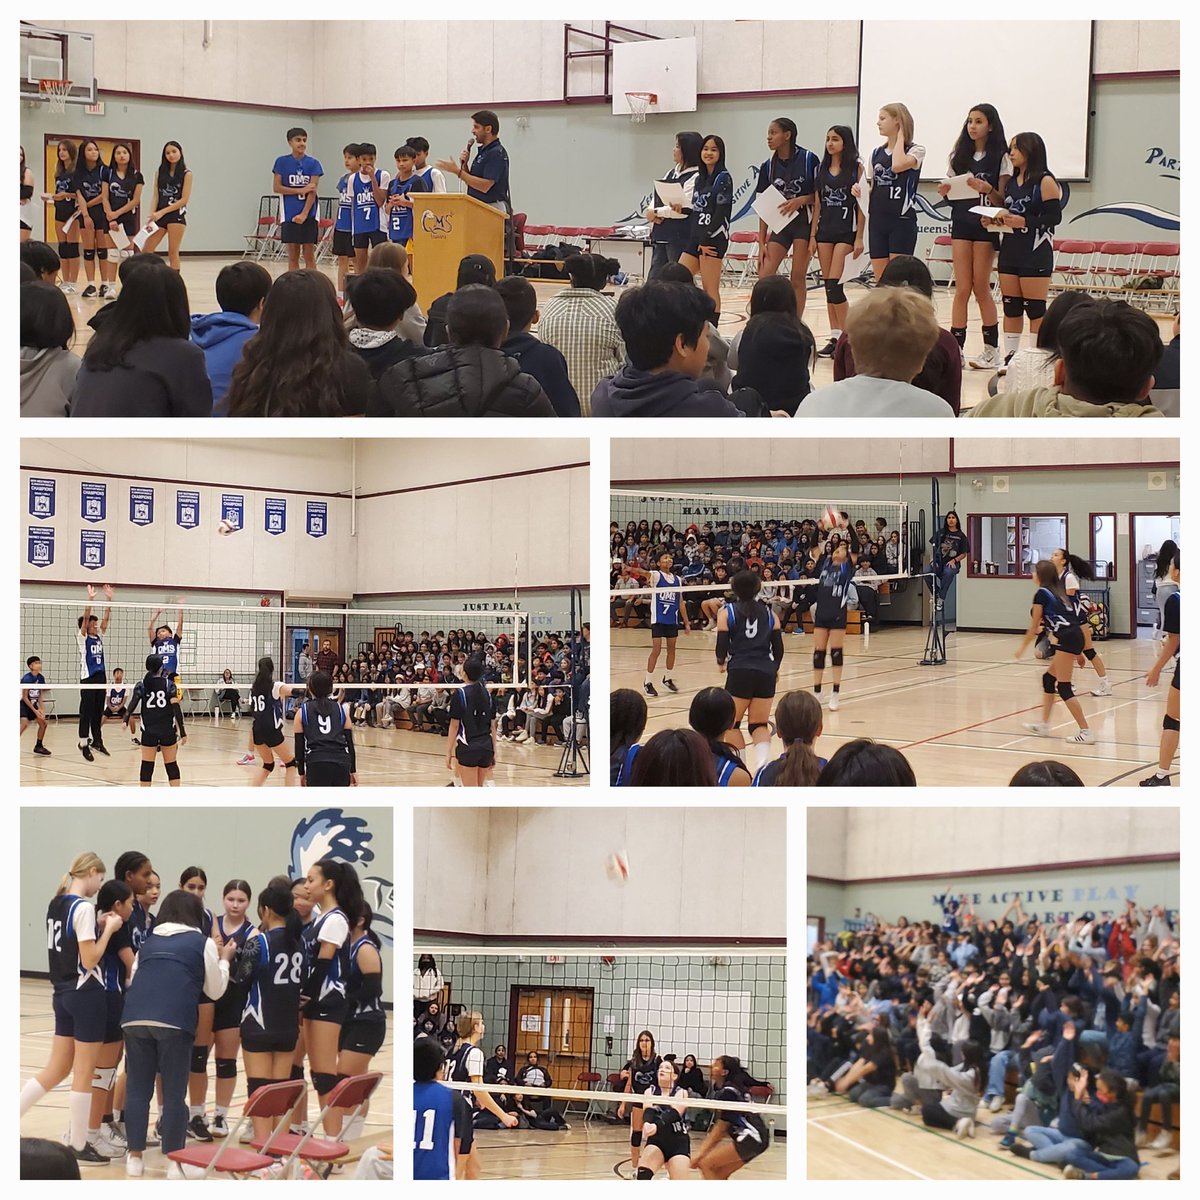 2 great days of school events at QMS. Thank you Rabbi Bregman & #TheOtherPeople presenters for sharing their stories & anti-racism message & w/our Ss (Wed)!🙏@KennethHeadley

Today it was fun to recognize our Gr. 8 Girls Volleyball team in our fall spirit assembly.👏
#sd40learns